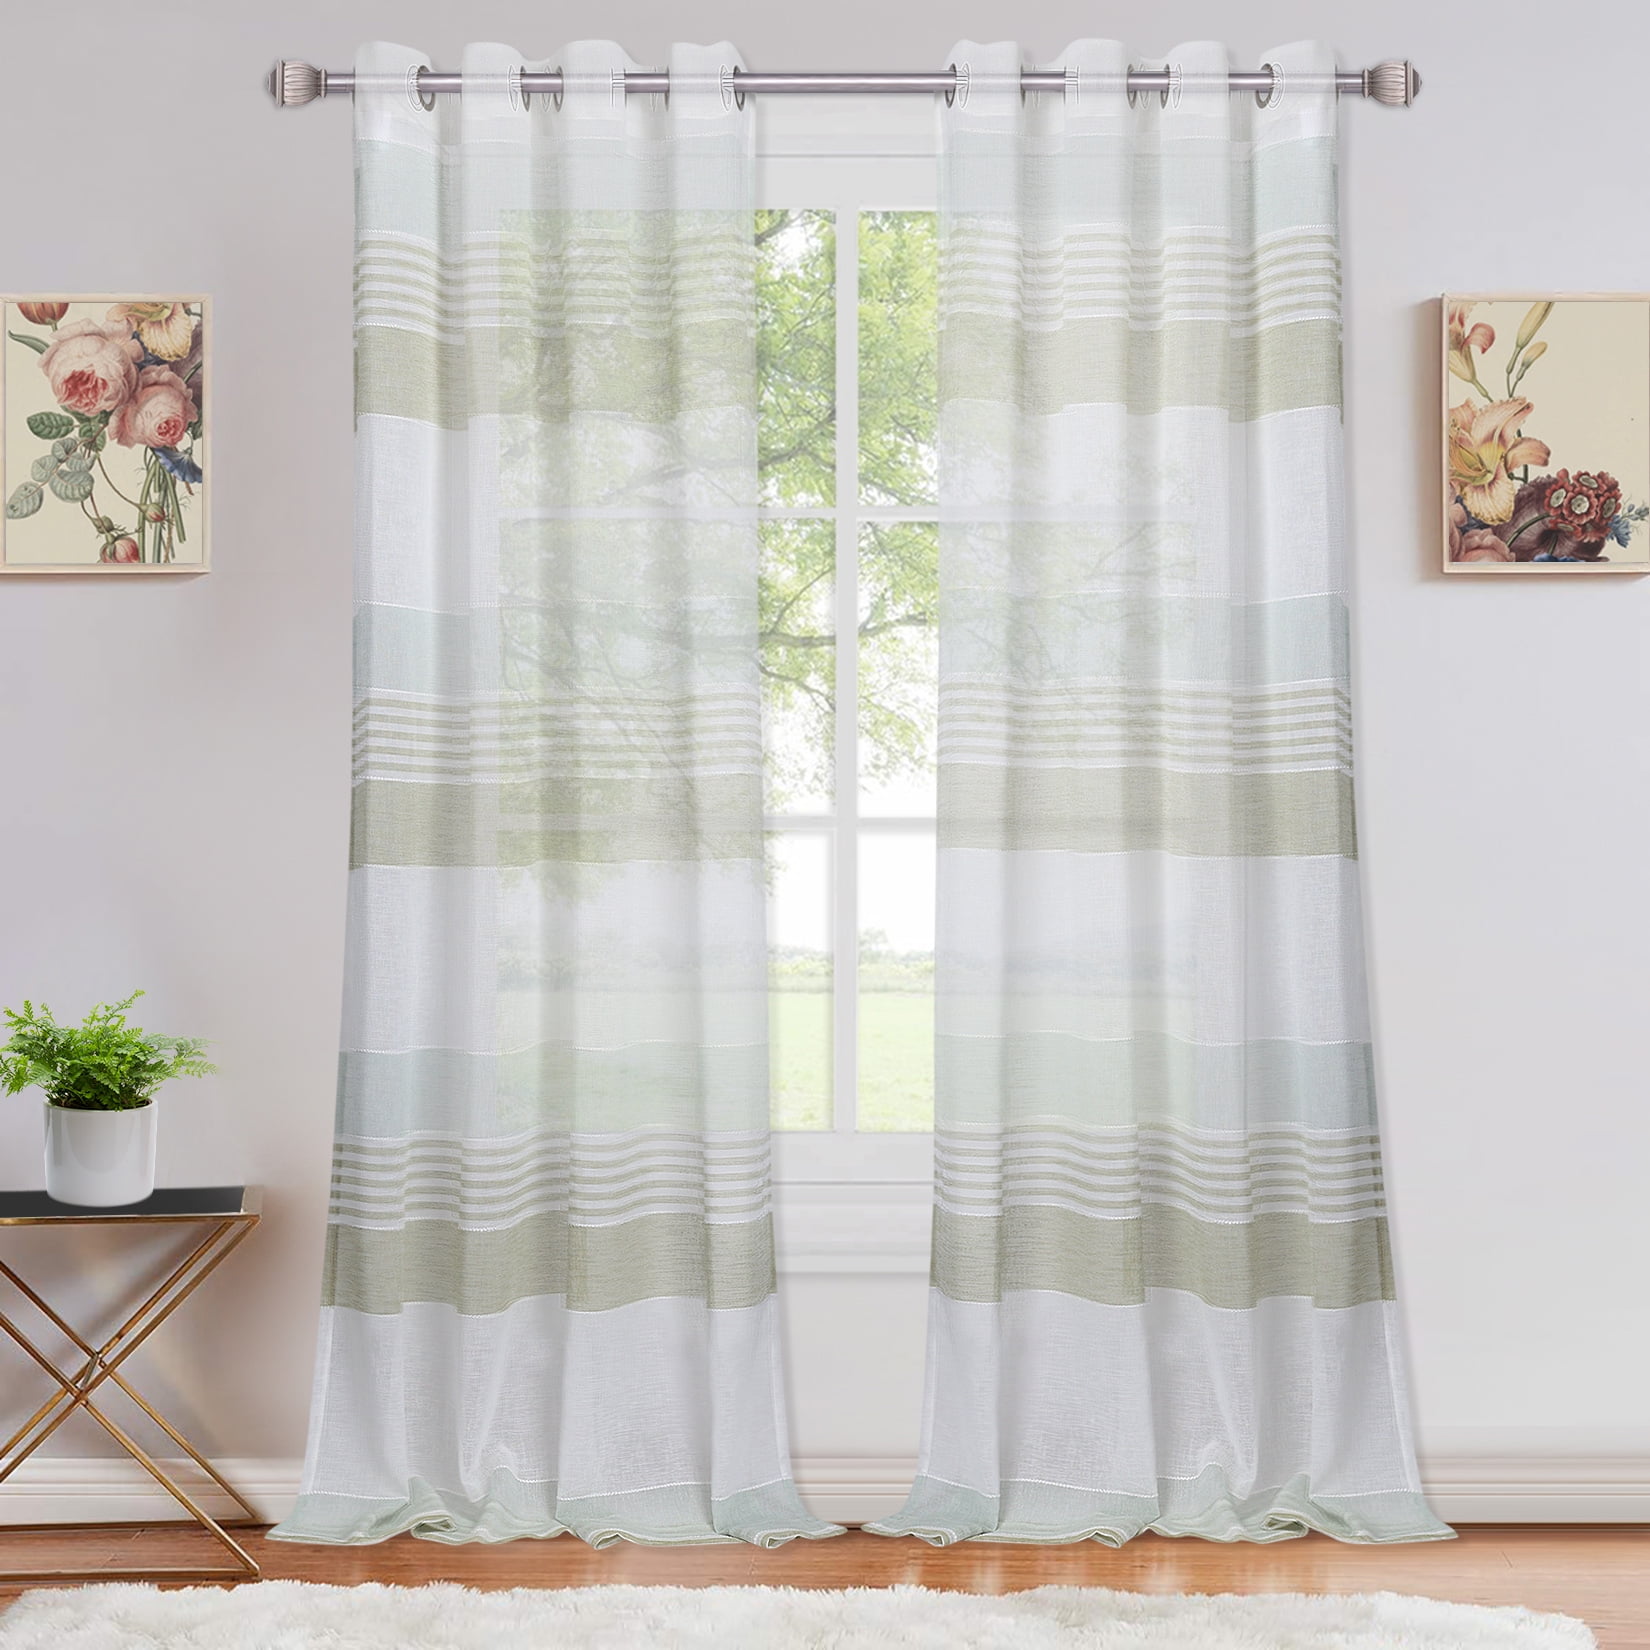 HOMERRY Sheer Curtains for Living Room 54 inch Length Farmhouse Rustic ...